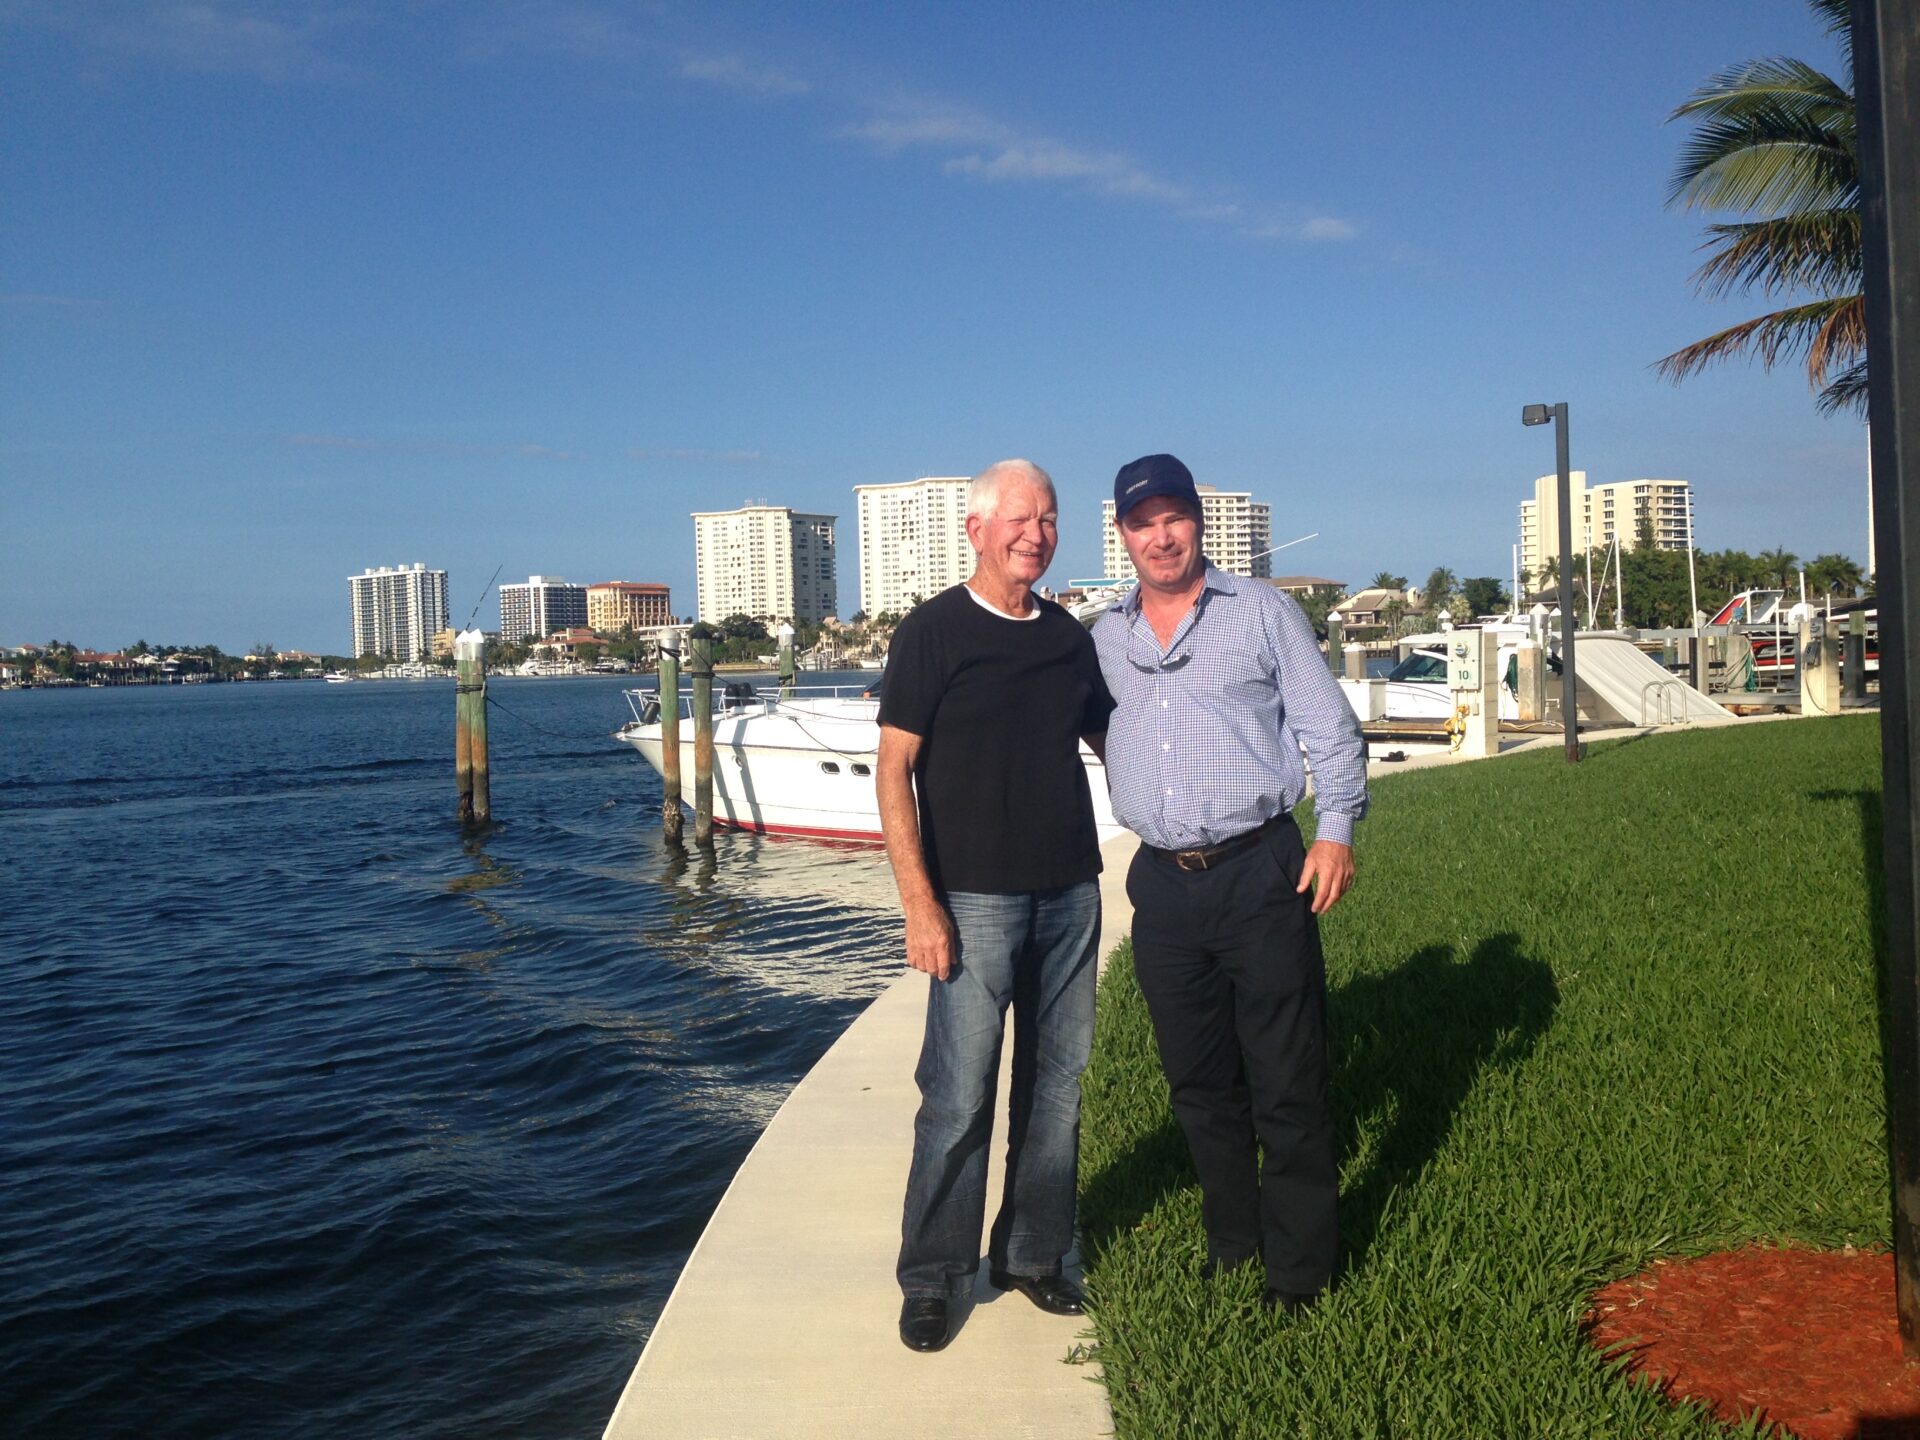 Two men standing by the yacht dock